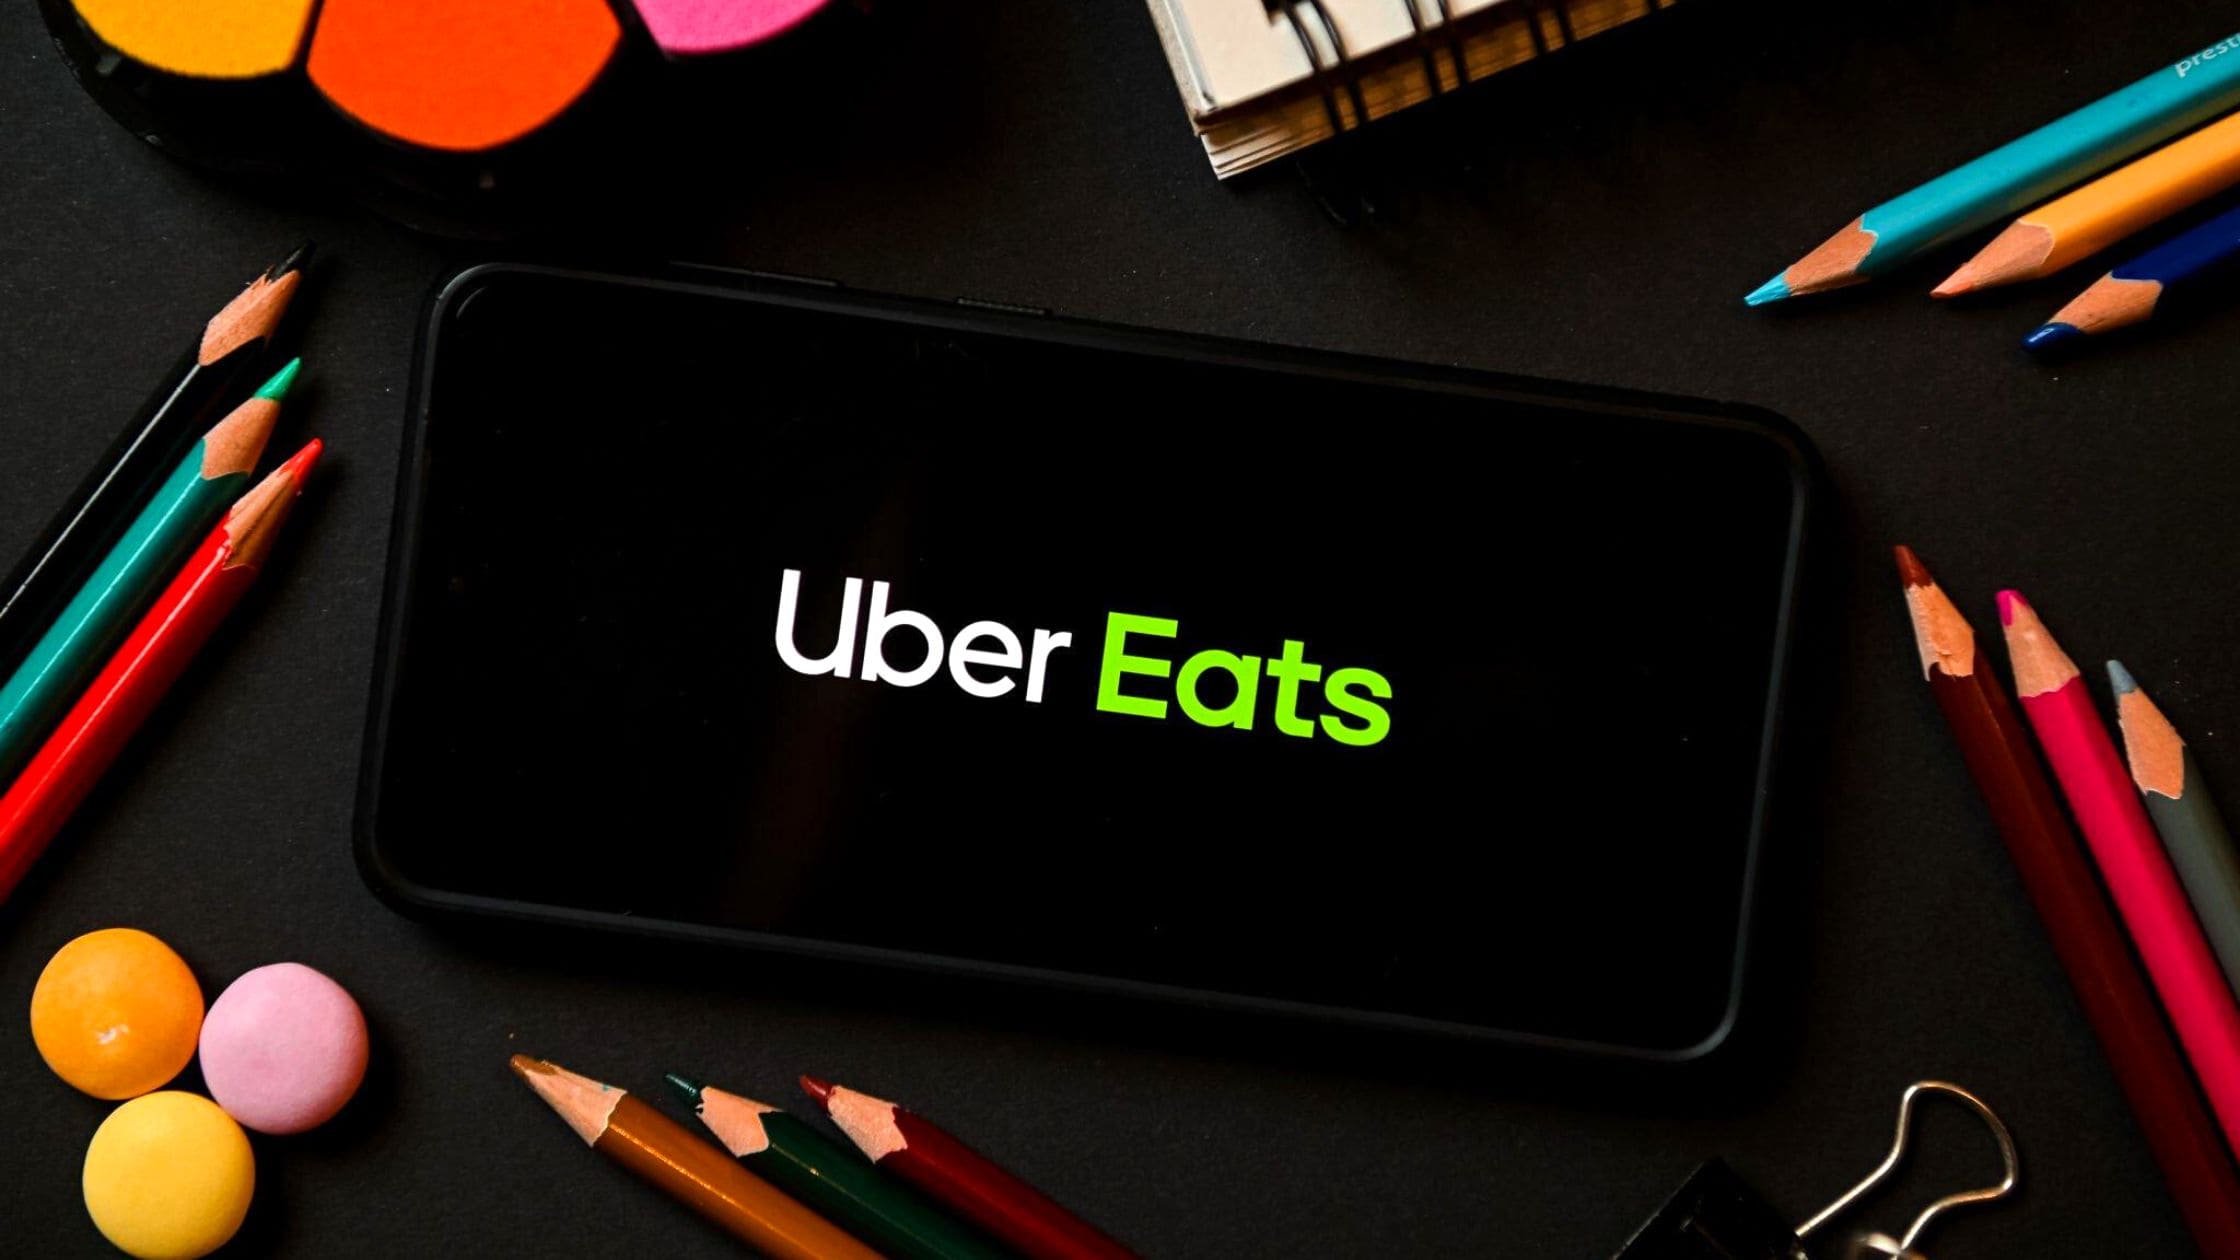 How To Make Money With Uber Eats - All You Need To Know!